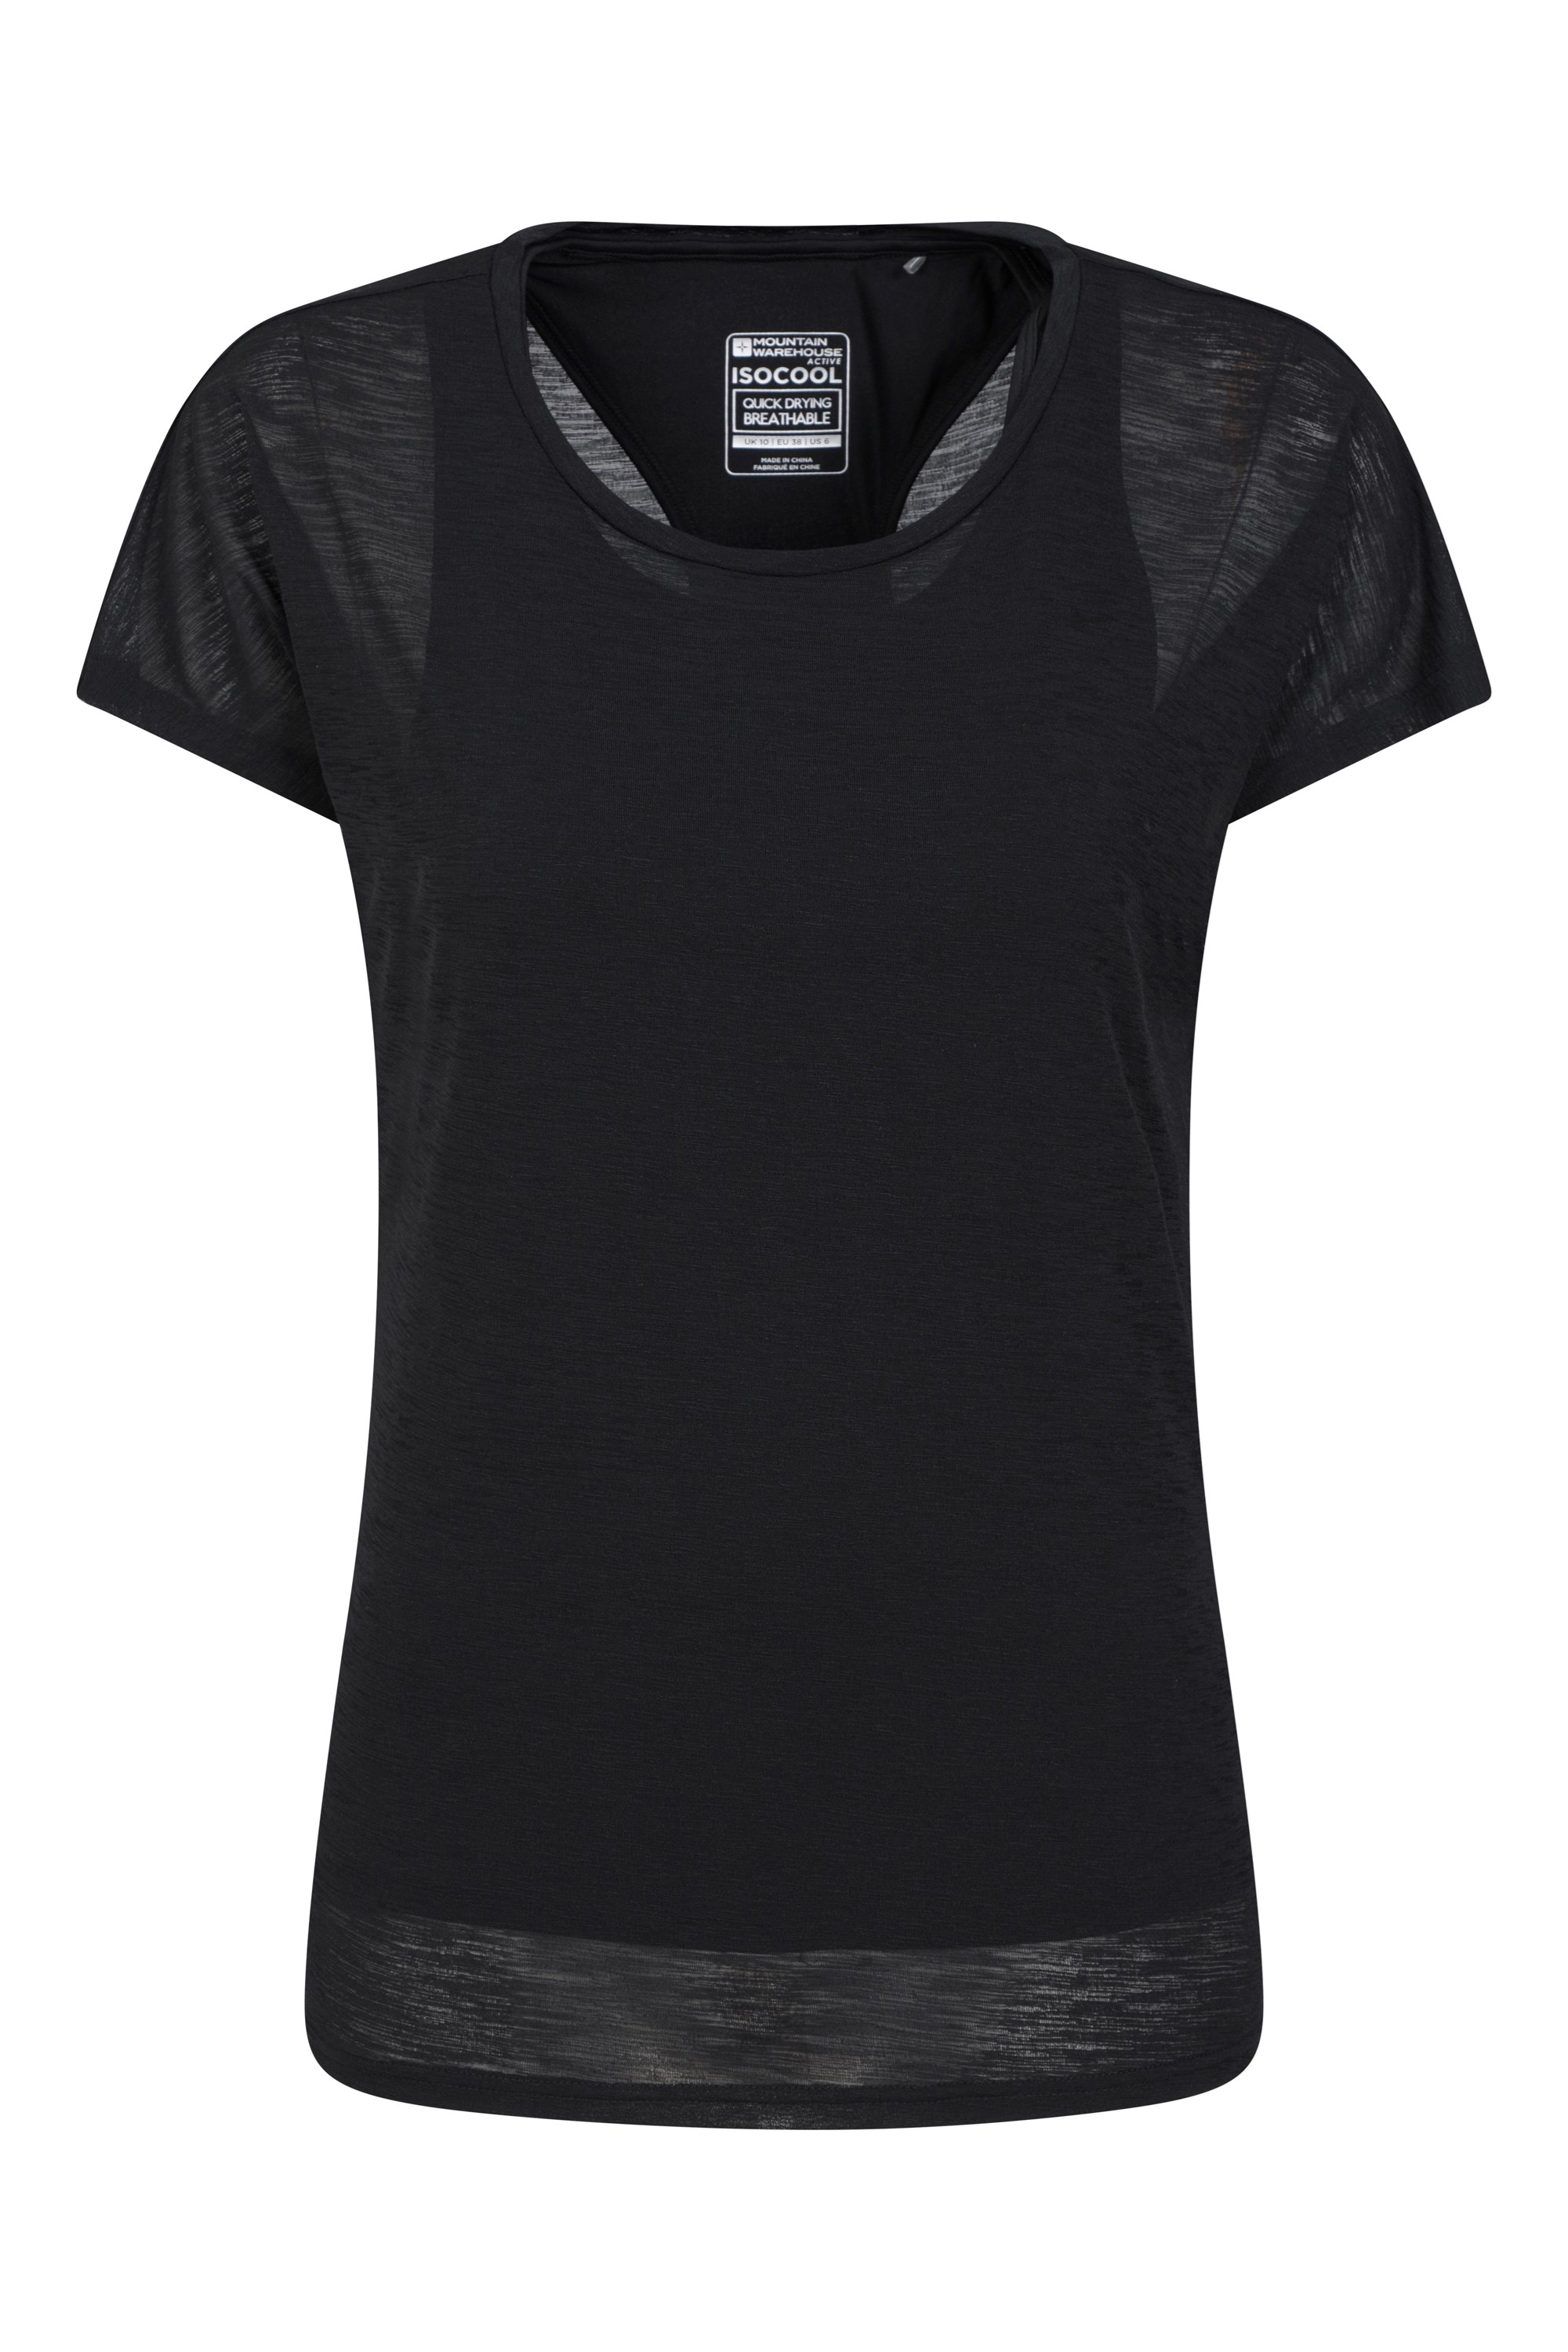 Double Layer Womens T-Shirt - Black